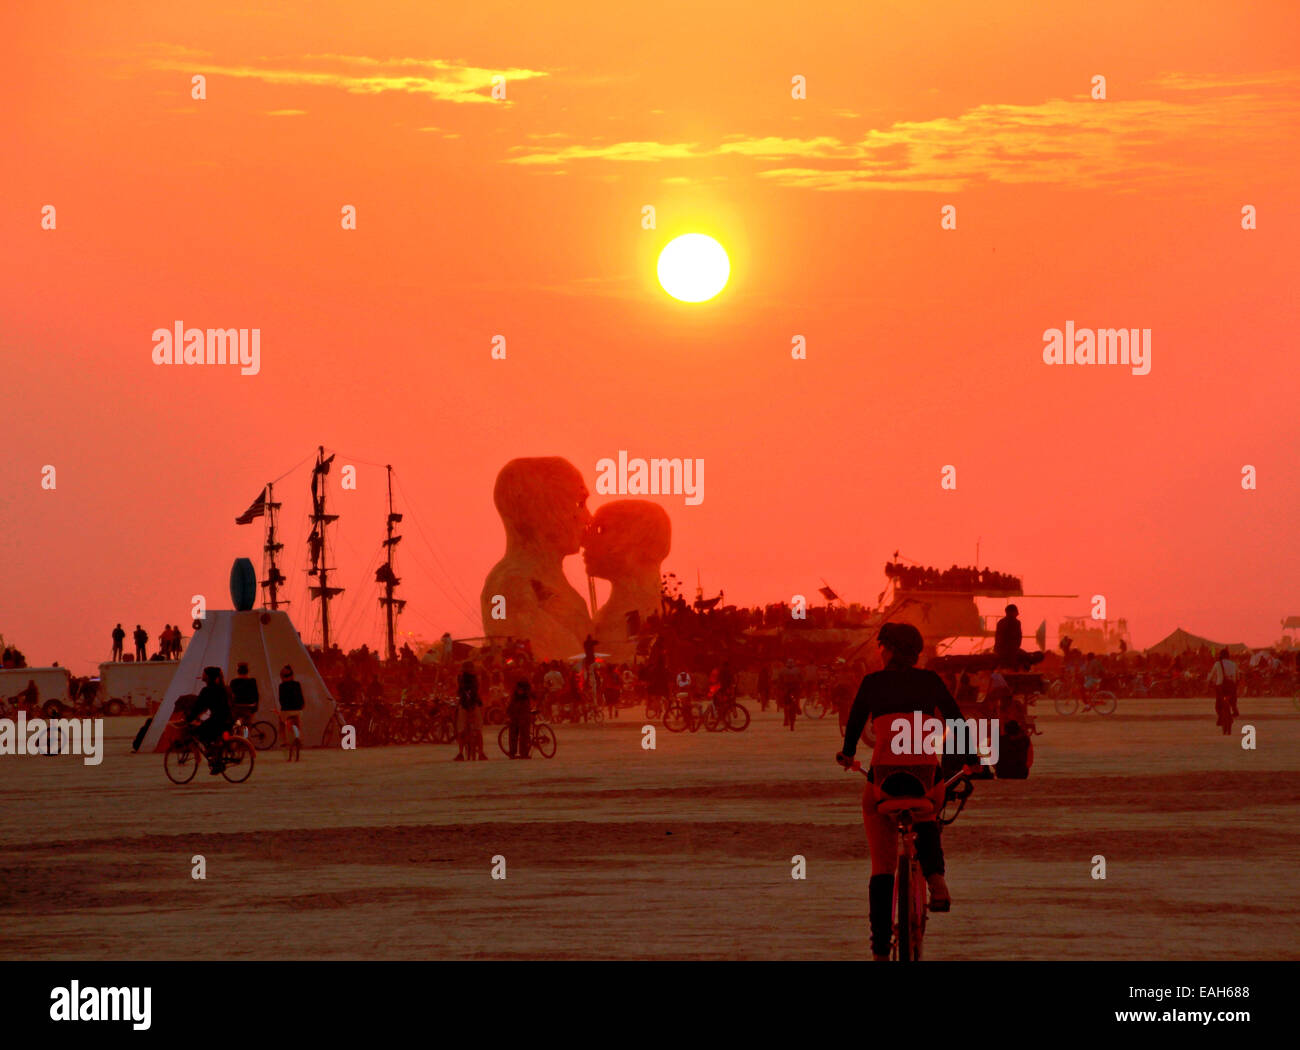 Sunrise on the playa at the annual Burning Man festival in the desert August 29, 2014 in Black Rock City, Nevada. Stock Photo